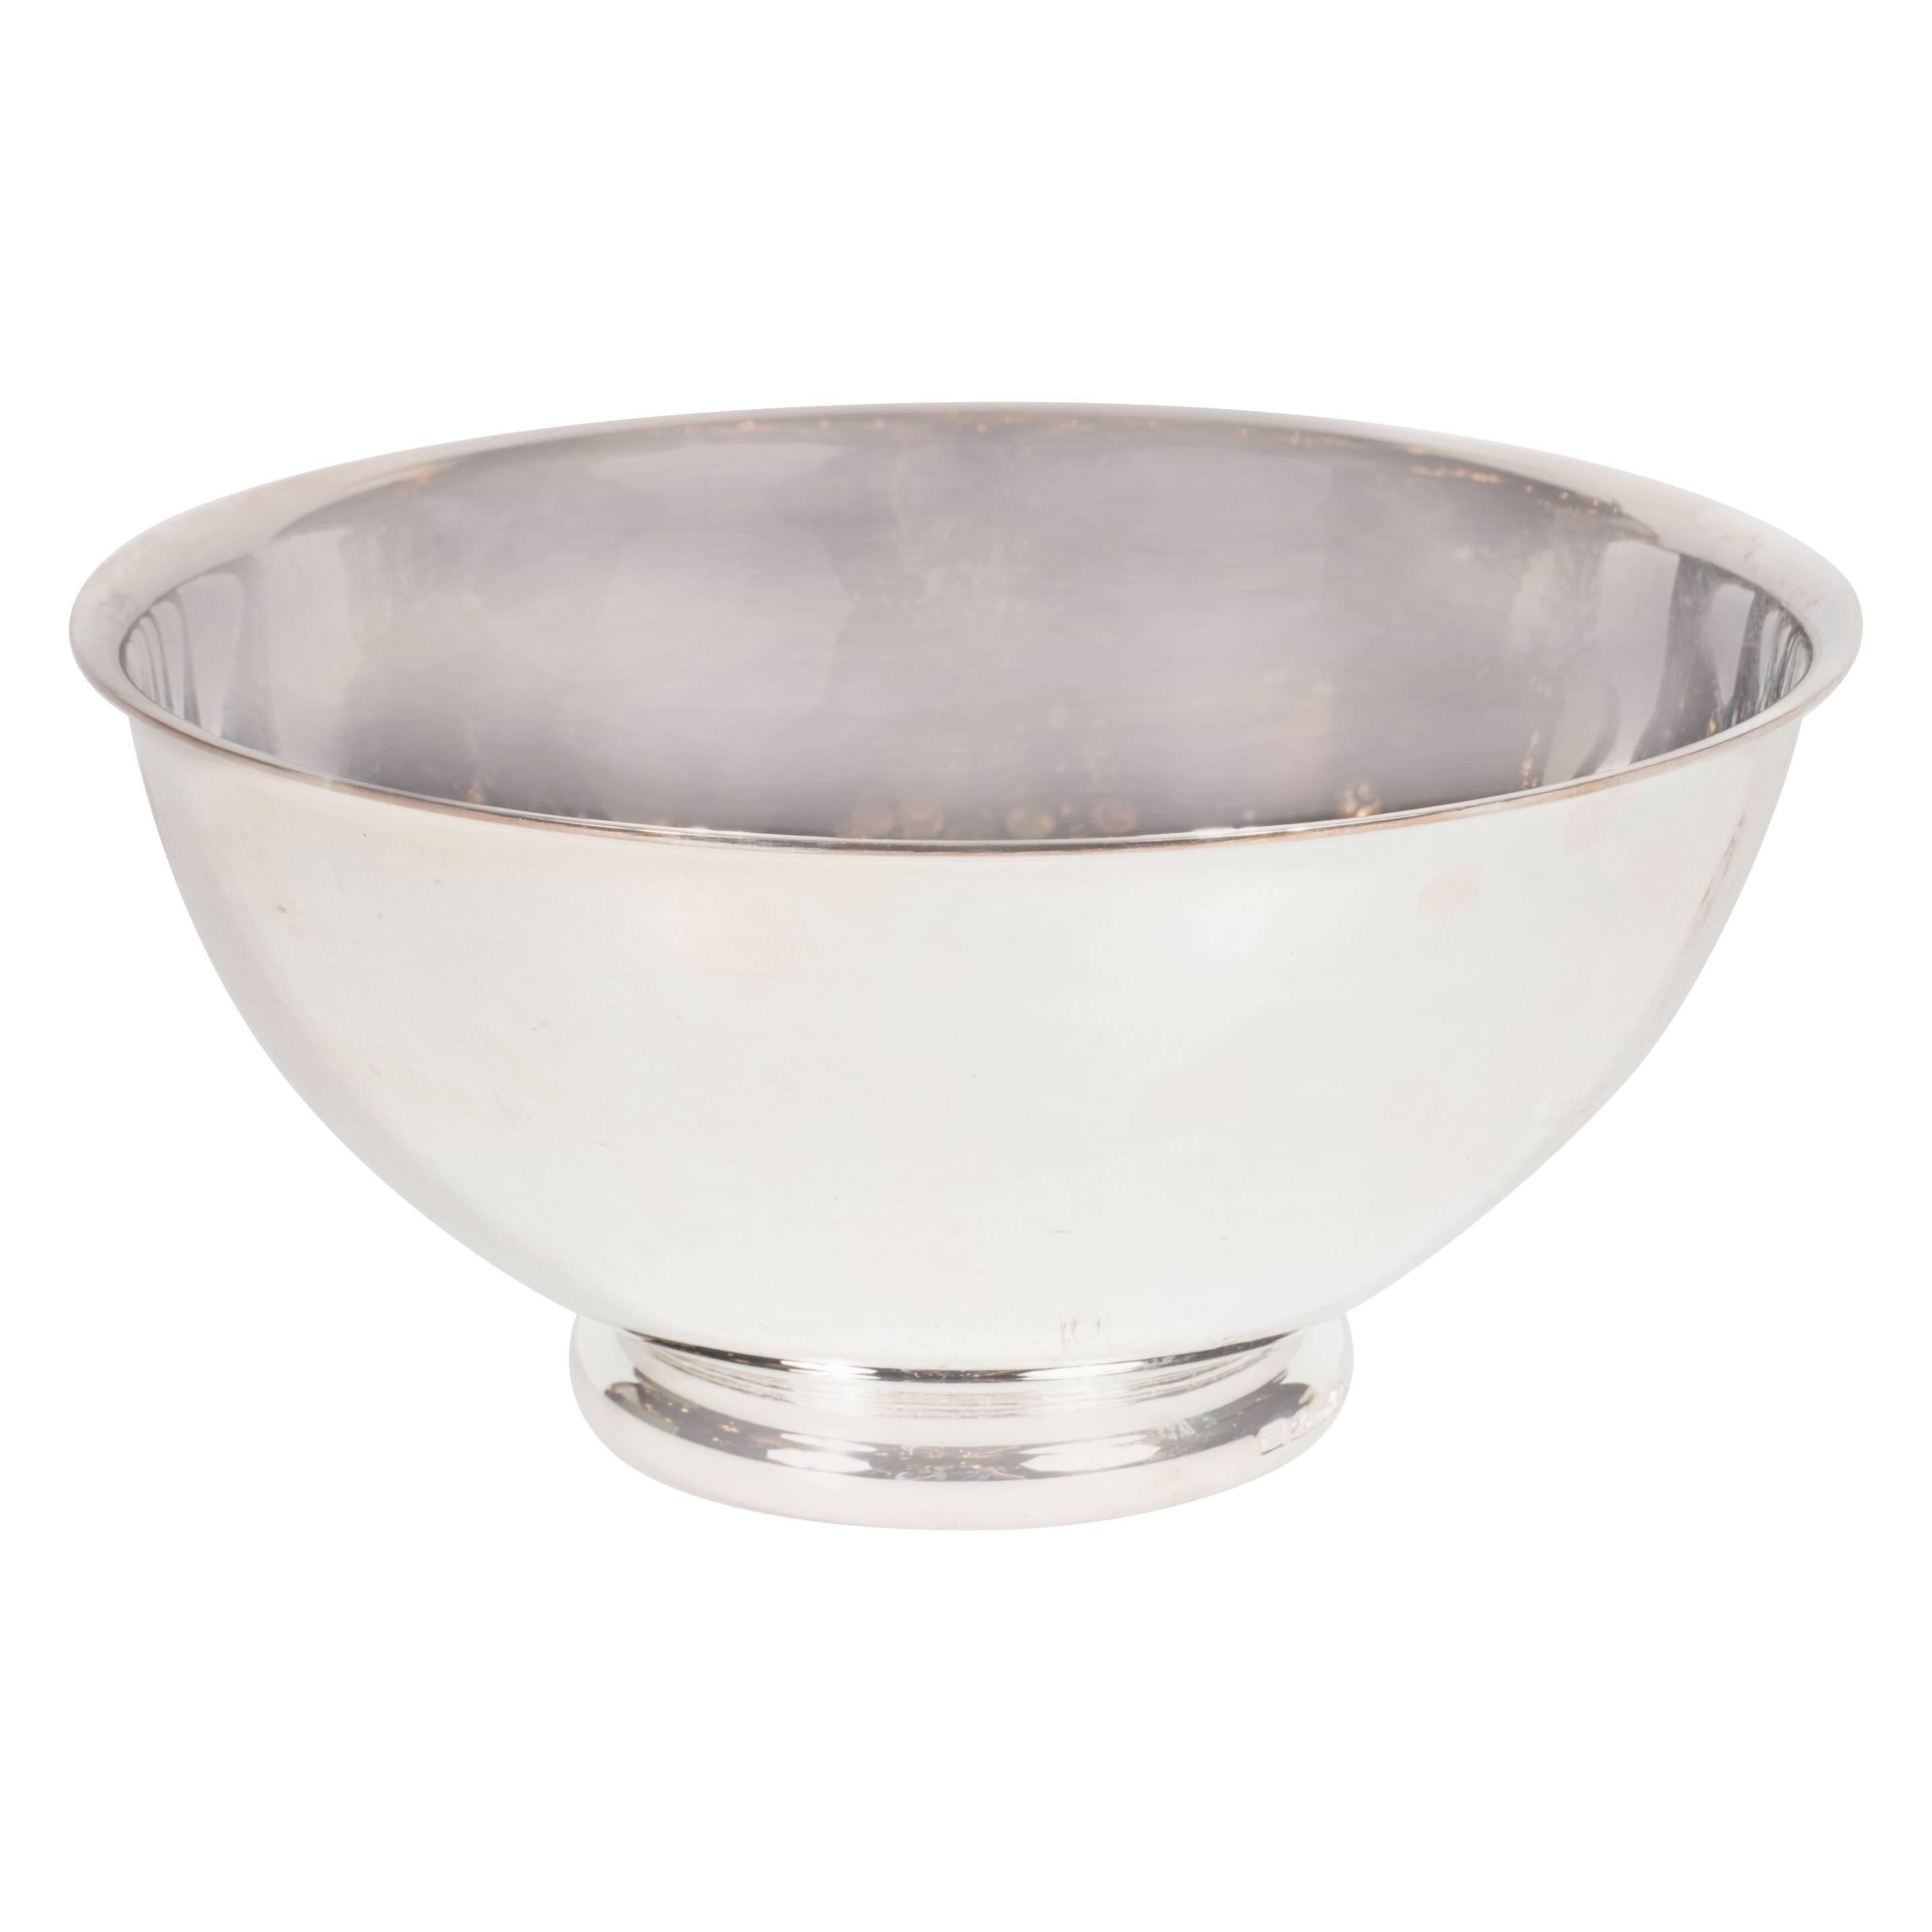 A gorgeous Vertigo series dish or bowl in silver plate with outward curved lip and rounded base signed Christofle. An ideal size for serving olives, candy or simply as an object in itself as a gift. Etched 